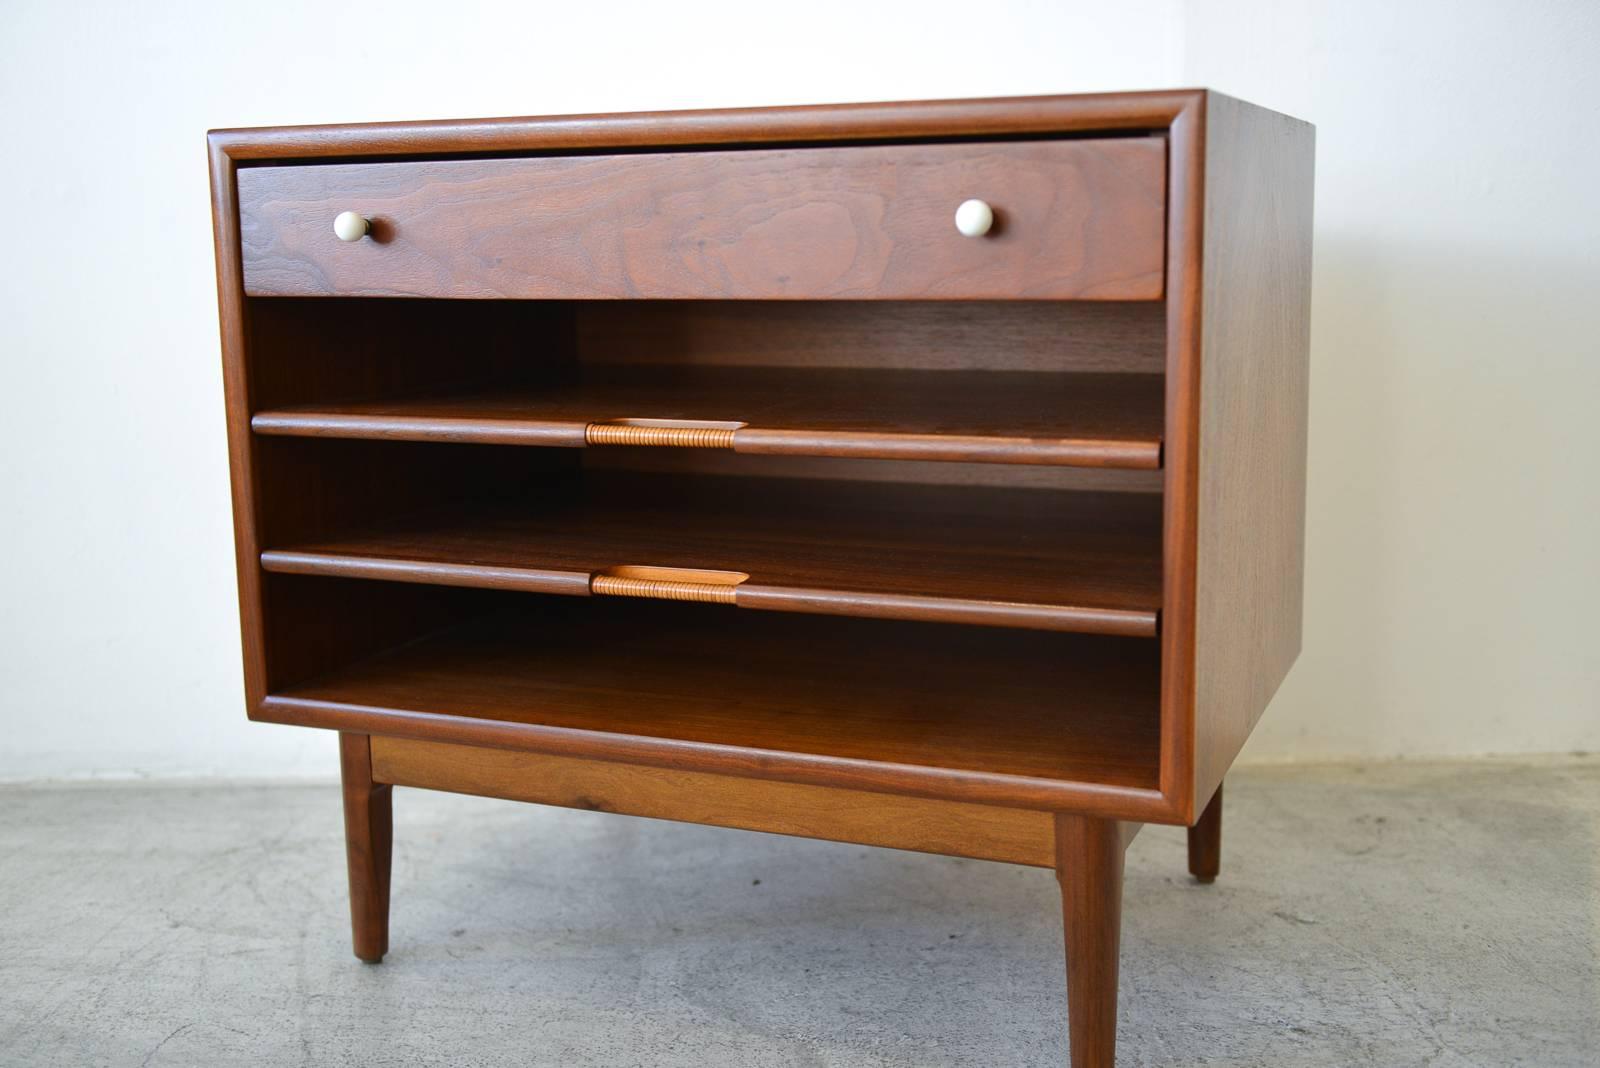 Pair of Kipp Stewart Walnut Nightstands with Pull Out Magazine Shelves, ca 1965.  Professionally restored in showroom condition with cane wrapped shelves and original porcelain drawer hardware.  Drawers slide out easily and are also